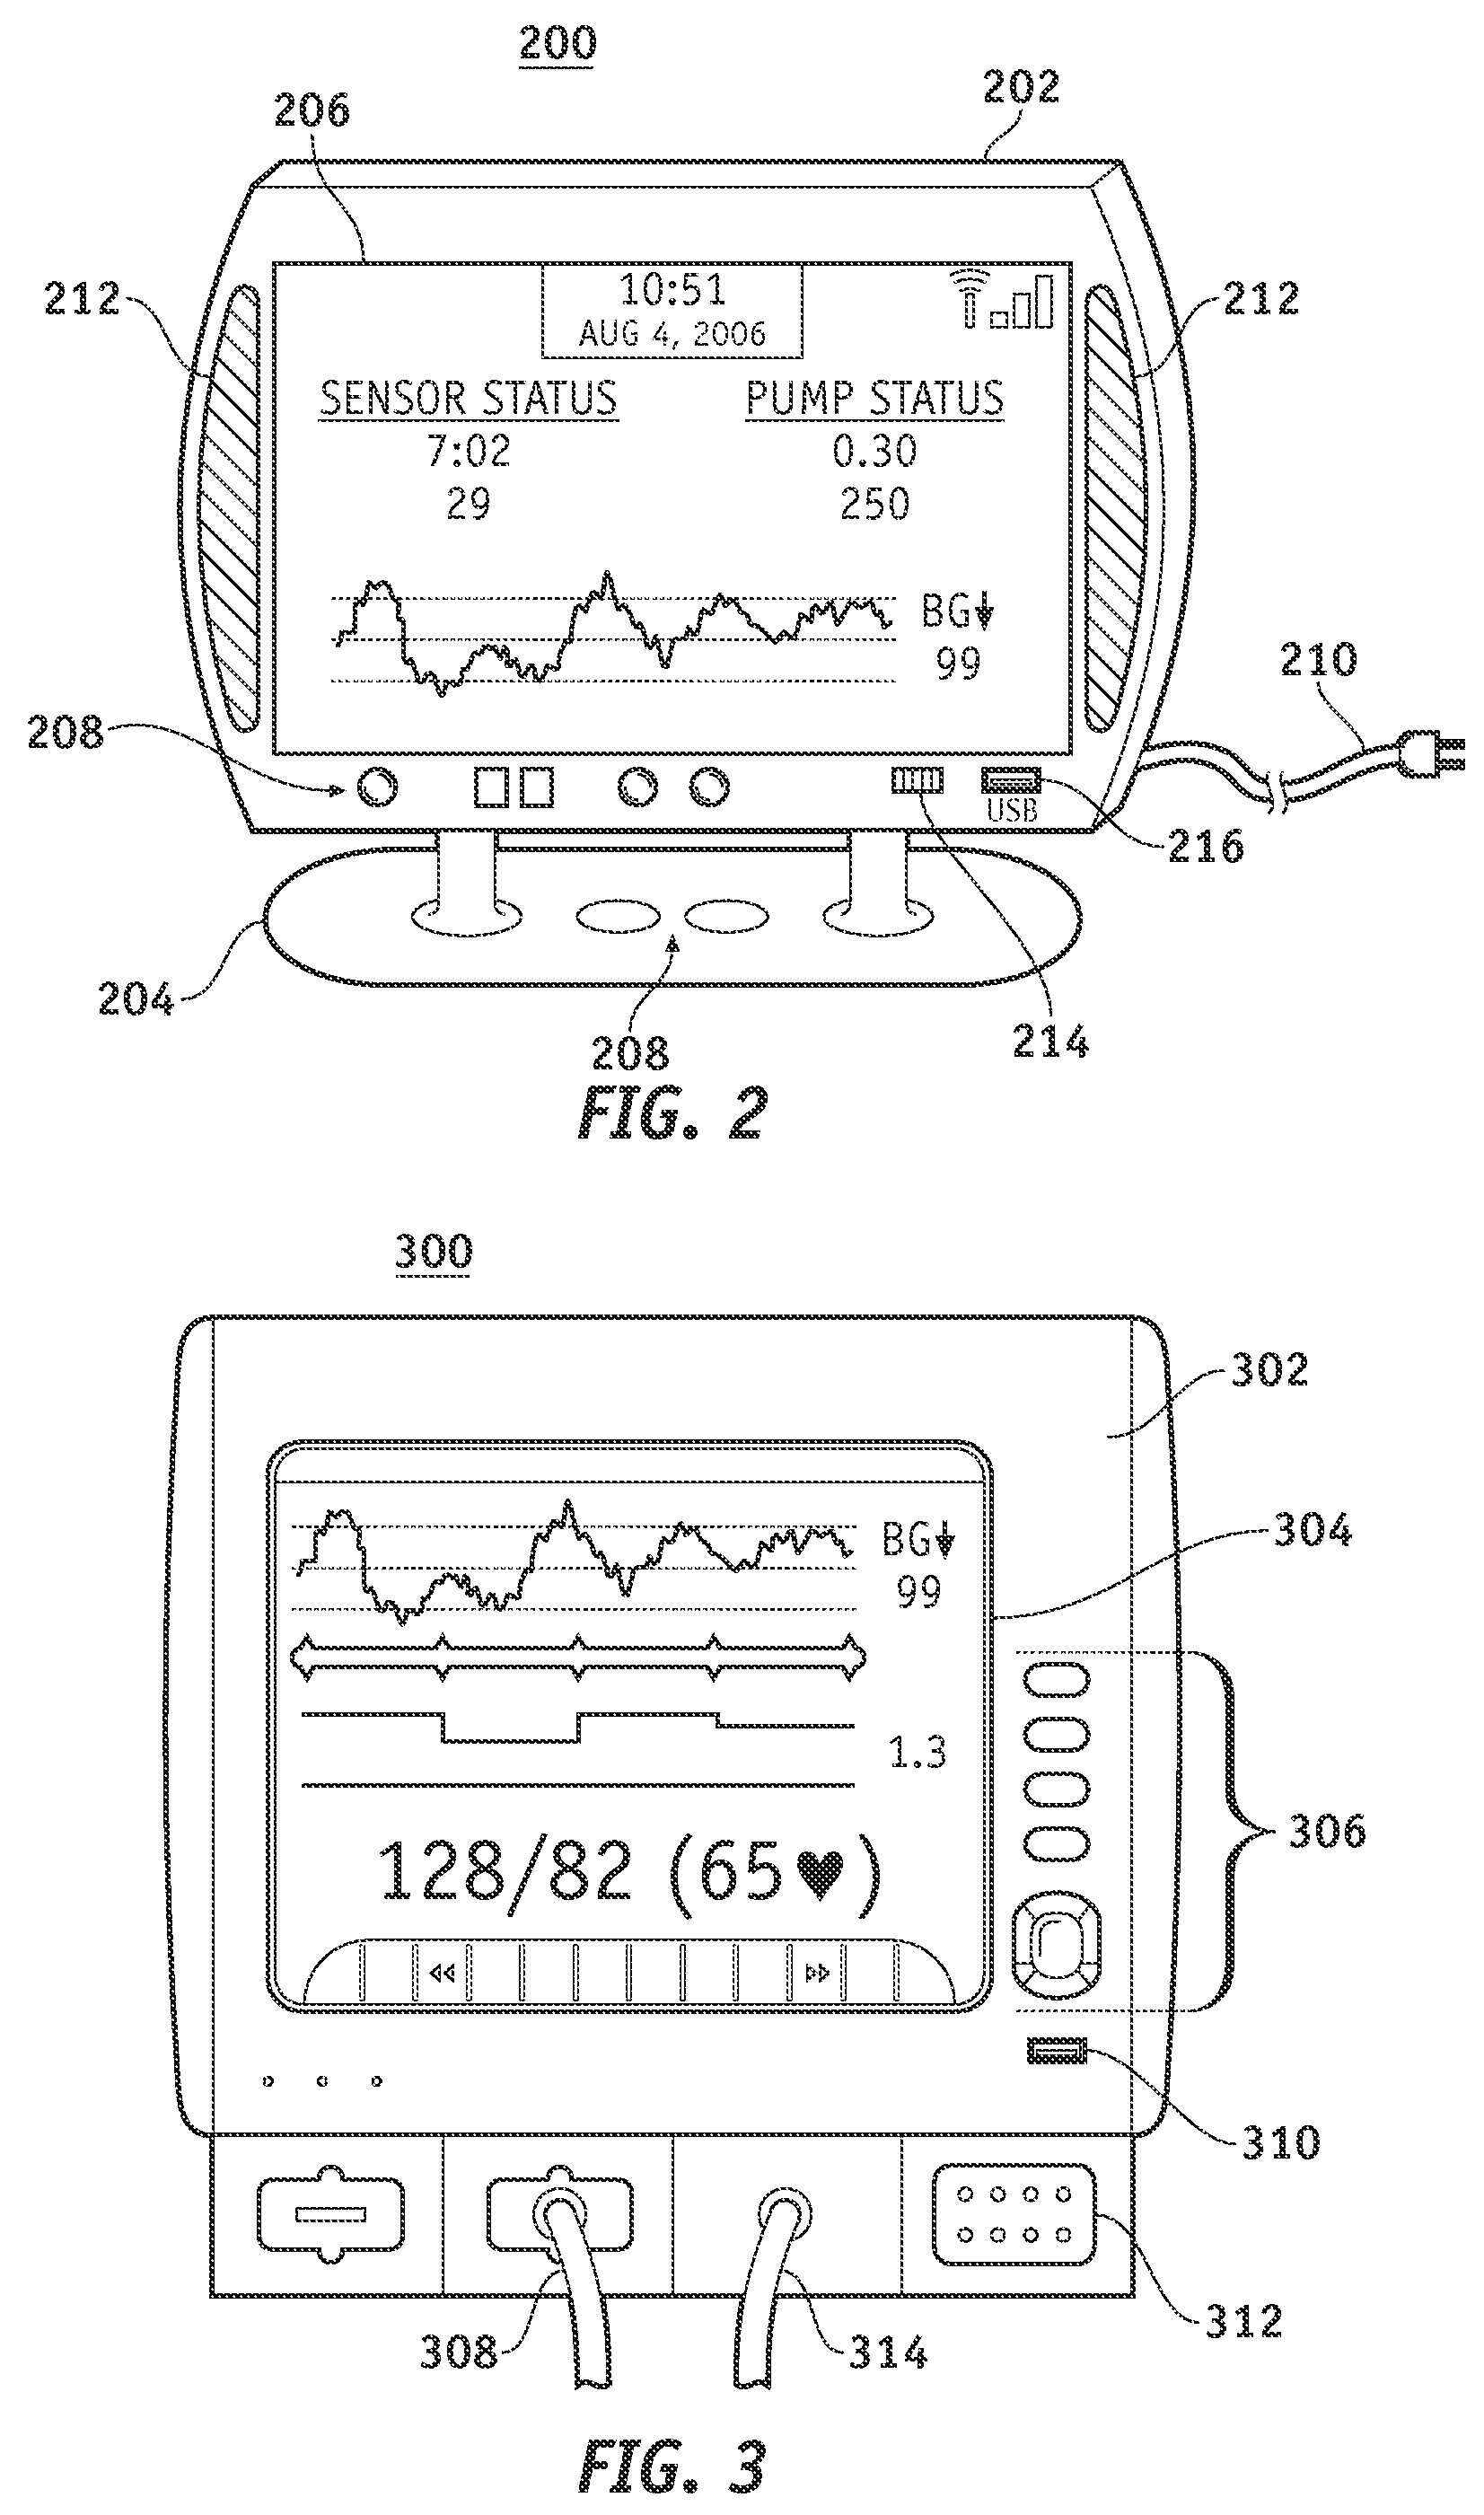 Subnetwork synchronization and variable transmit synchronization techniques for a wireless medical device network